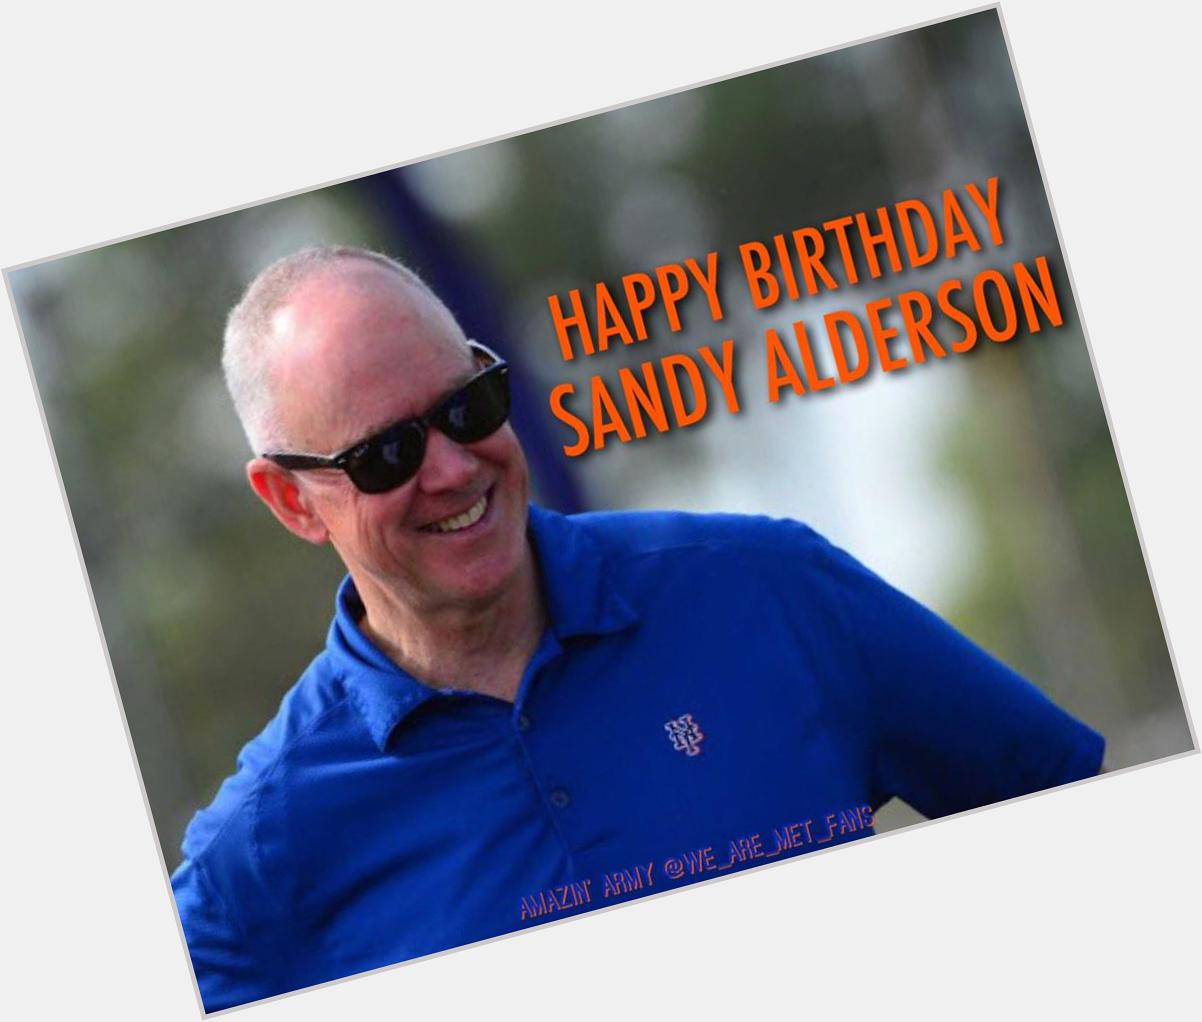 Happy Birthday to Sandy Alderson! A shortstop would be a perfect birthday gift! 